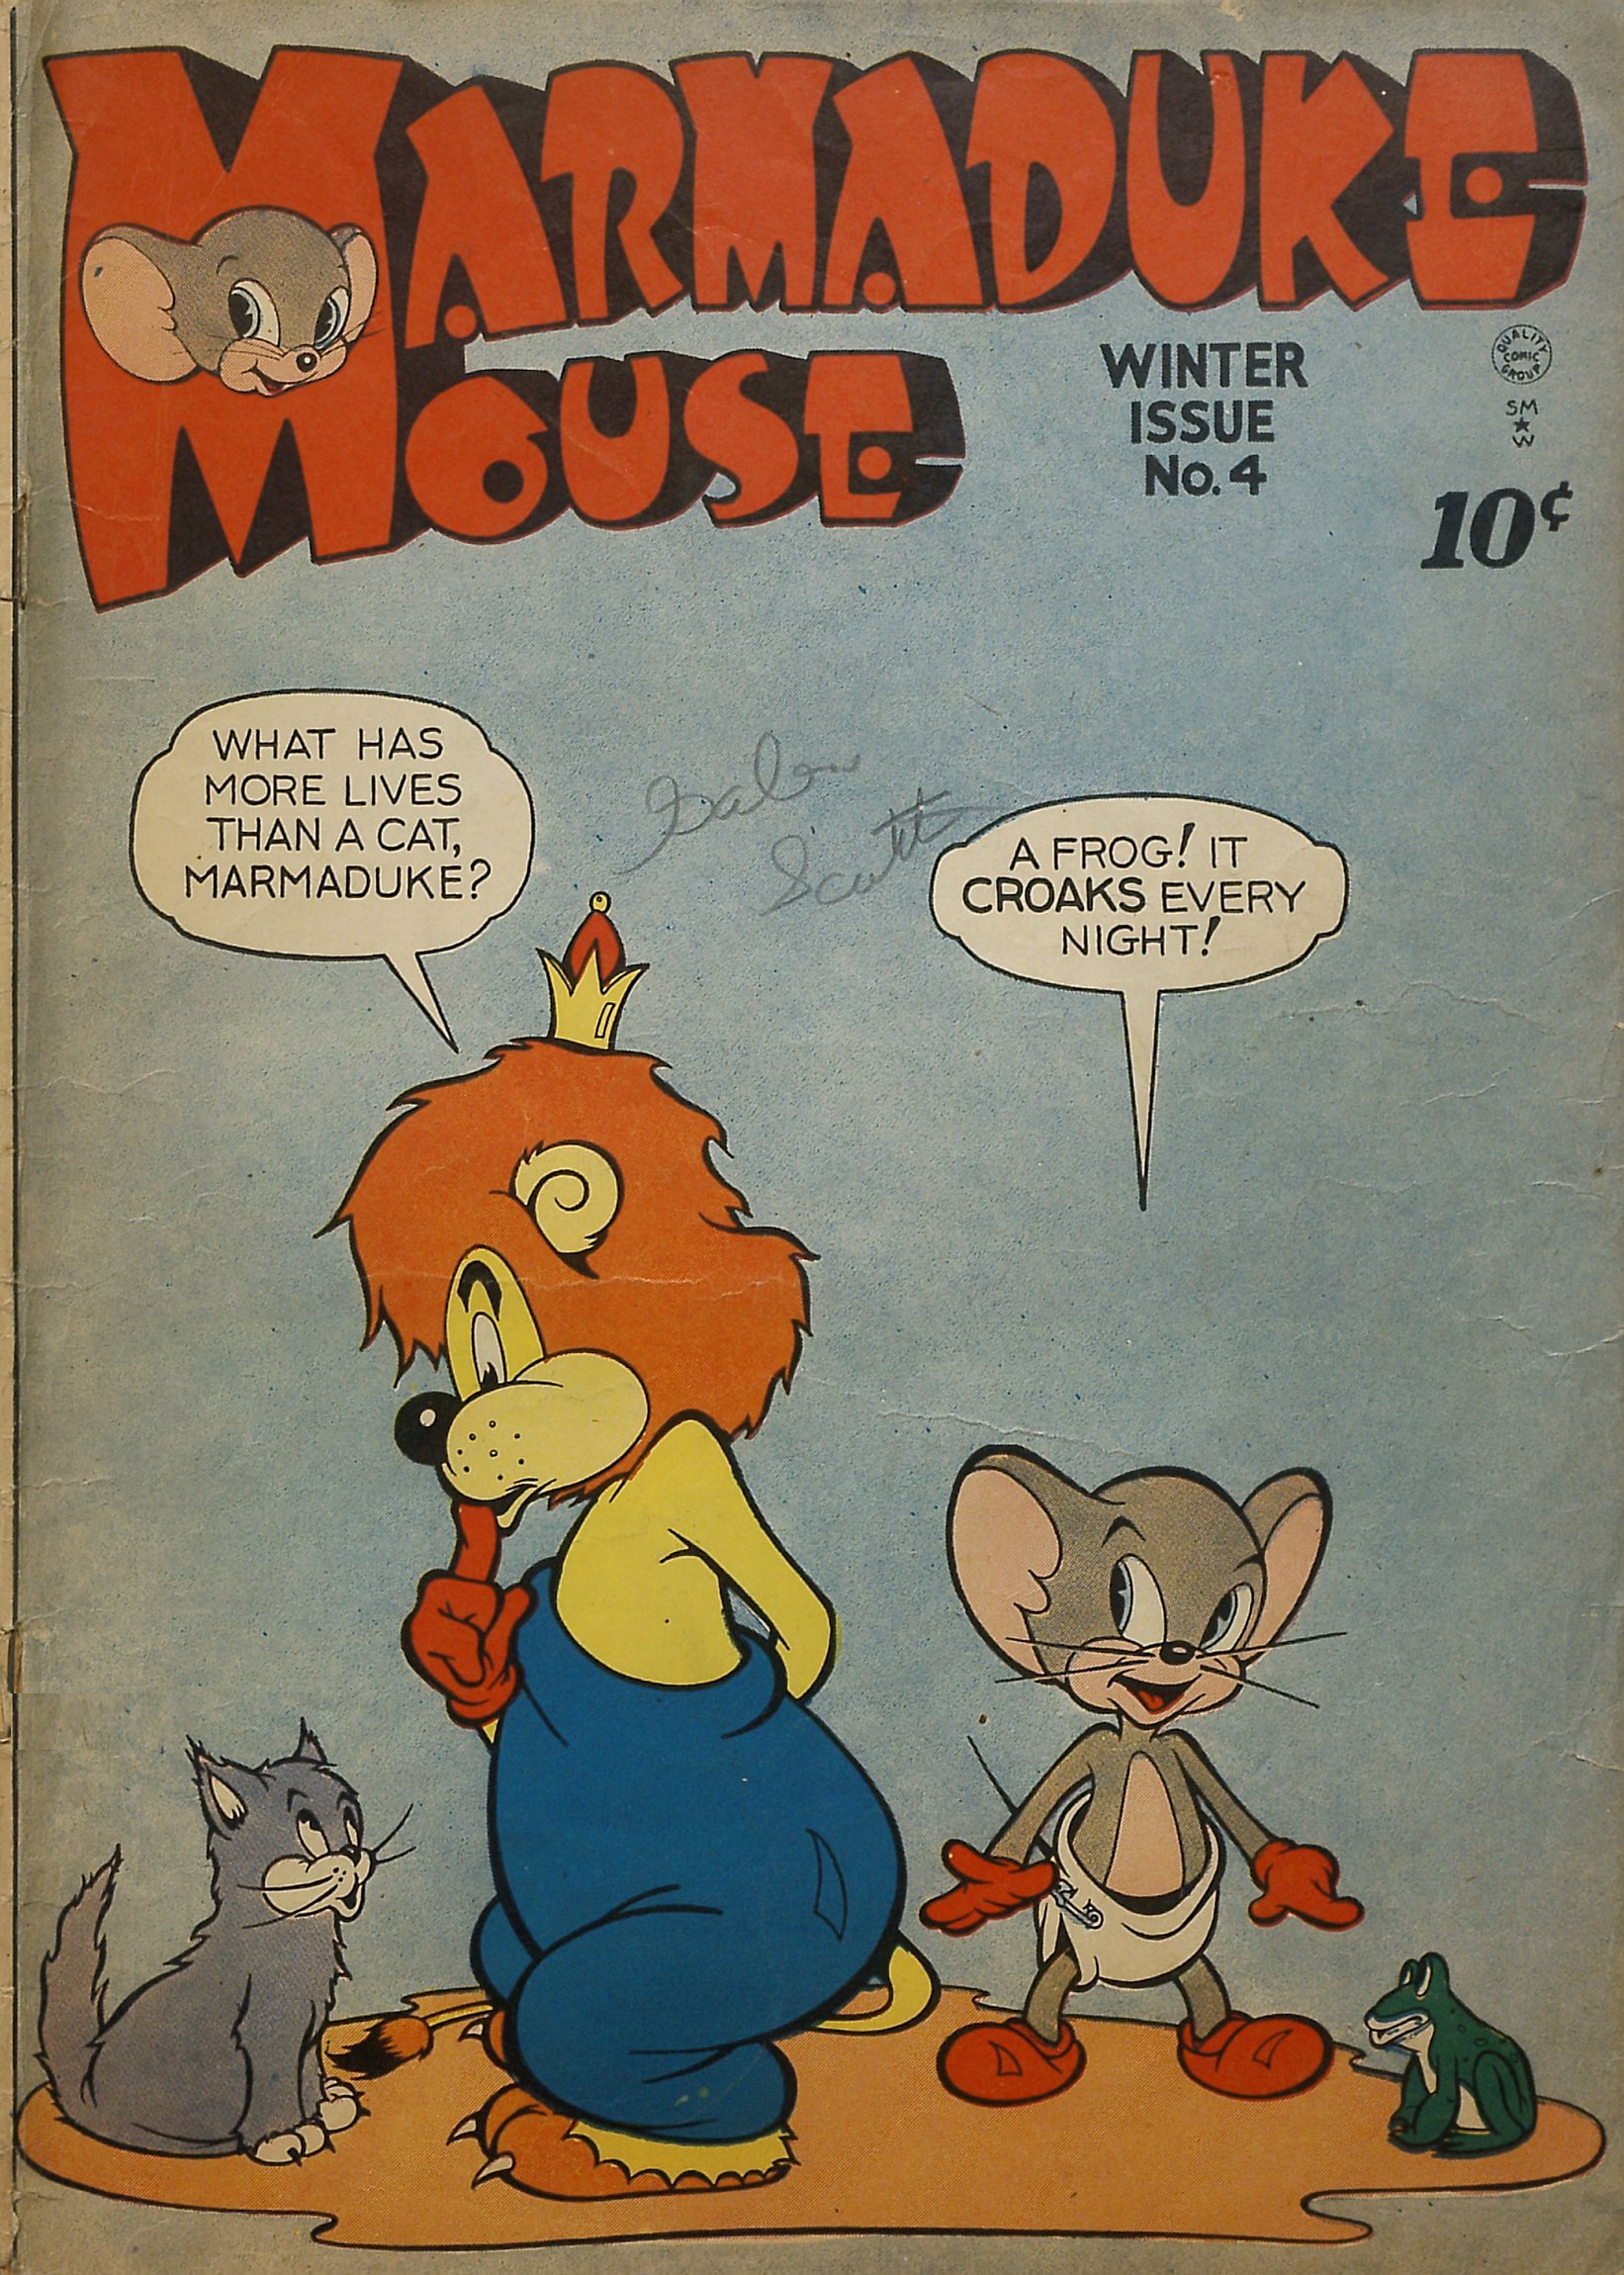 Read online Marmaduke Mouse comic -  Issue #4 - 1